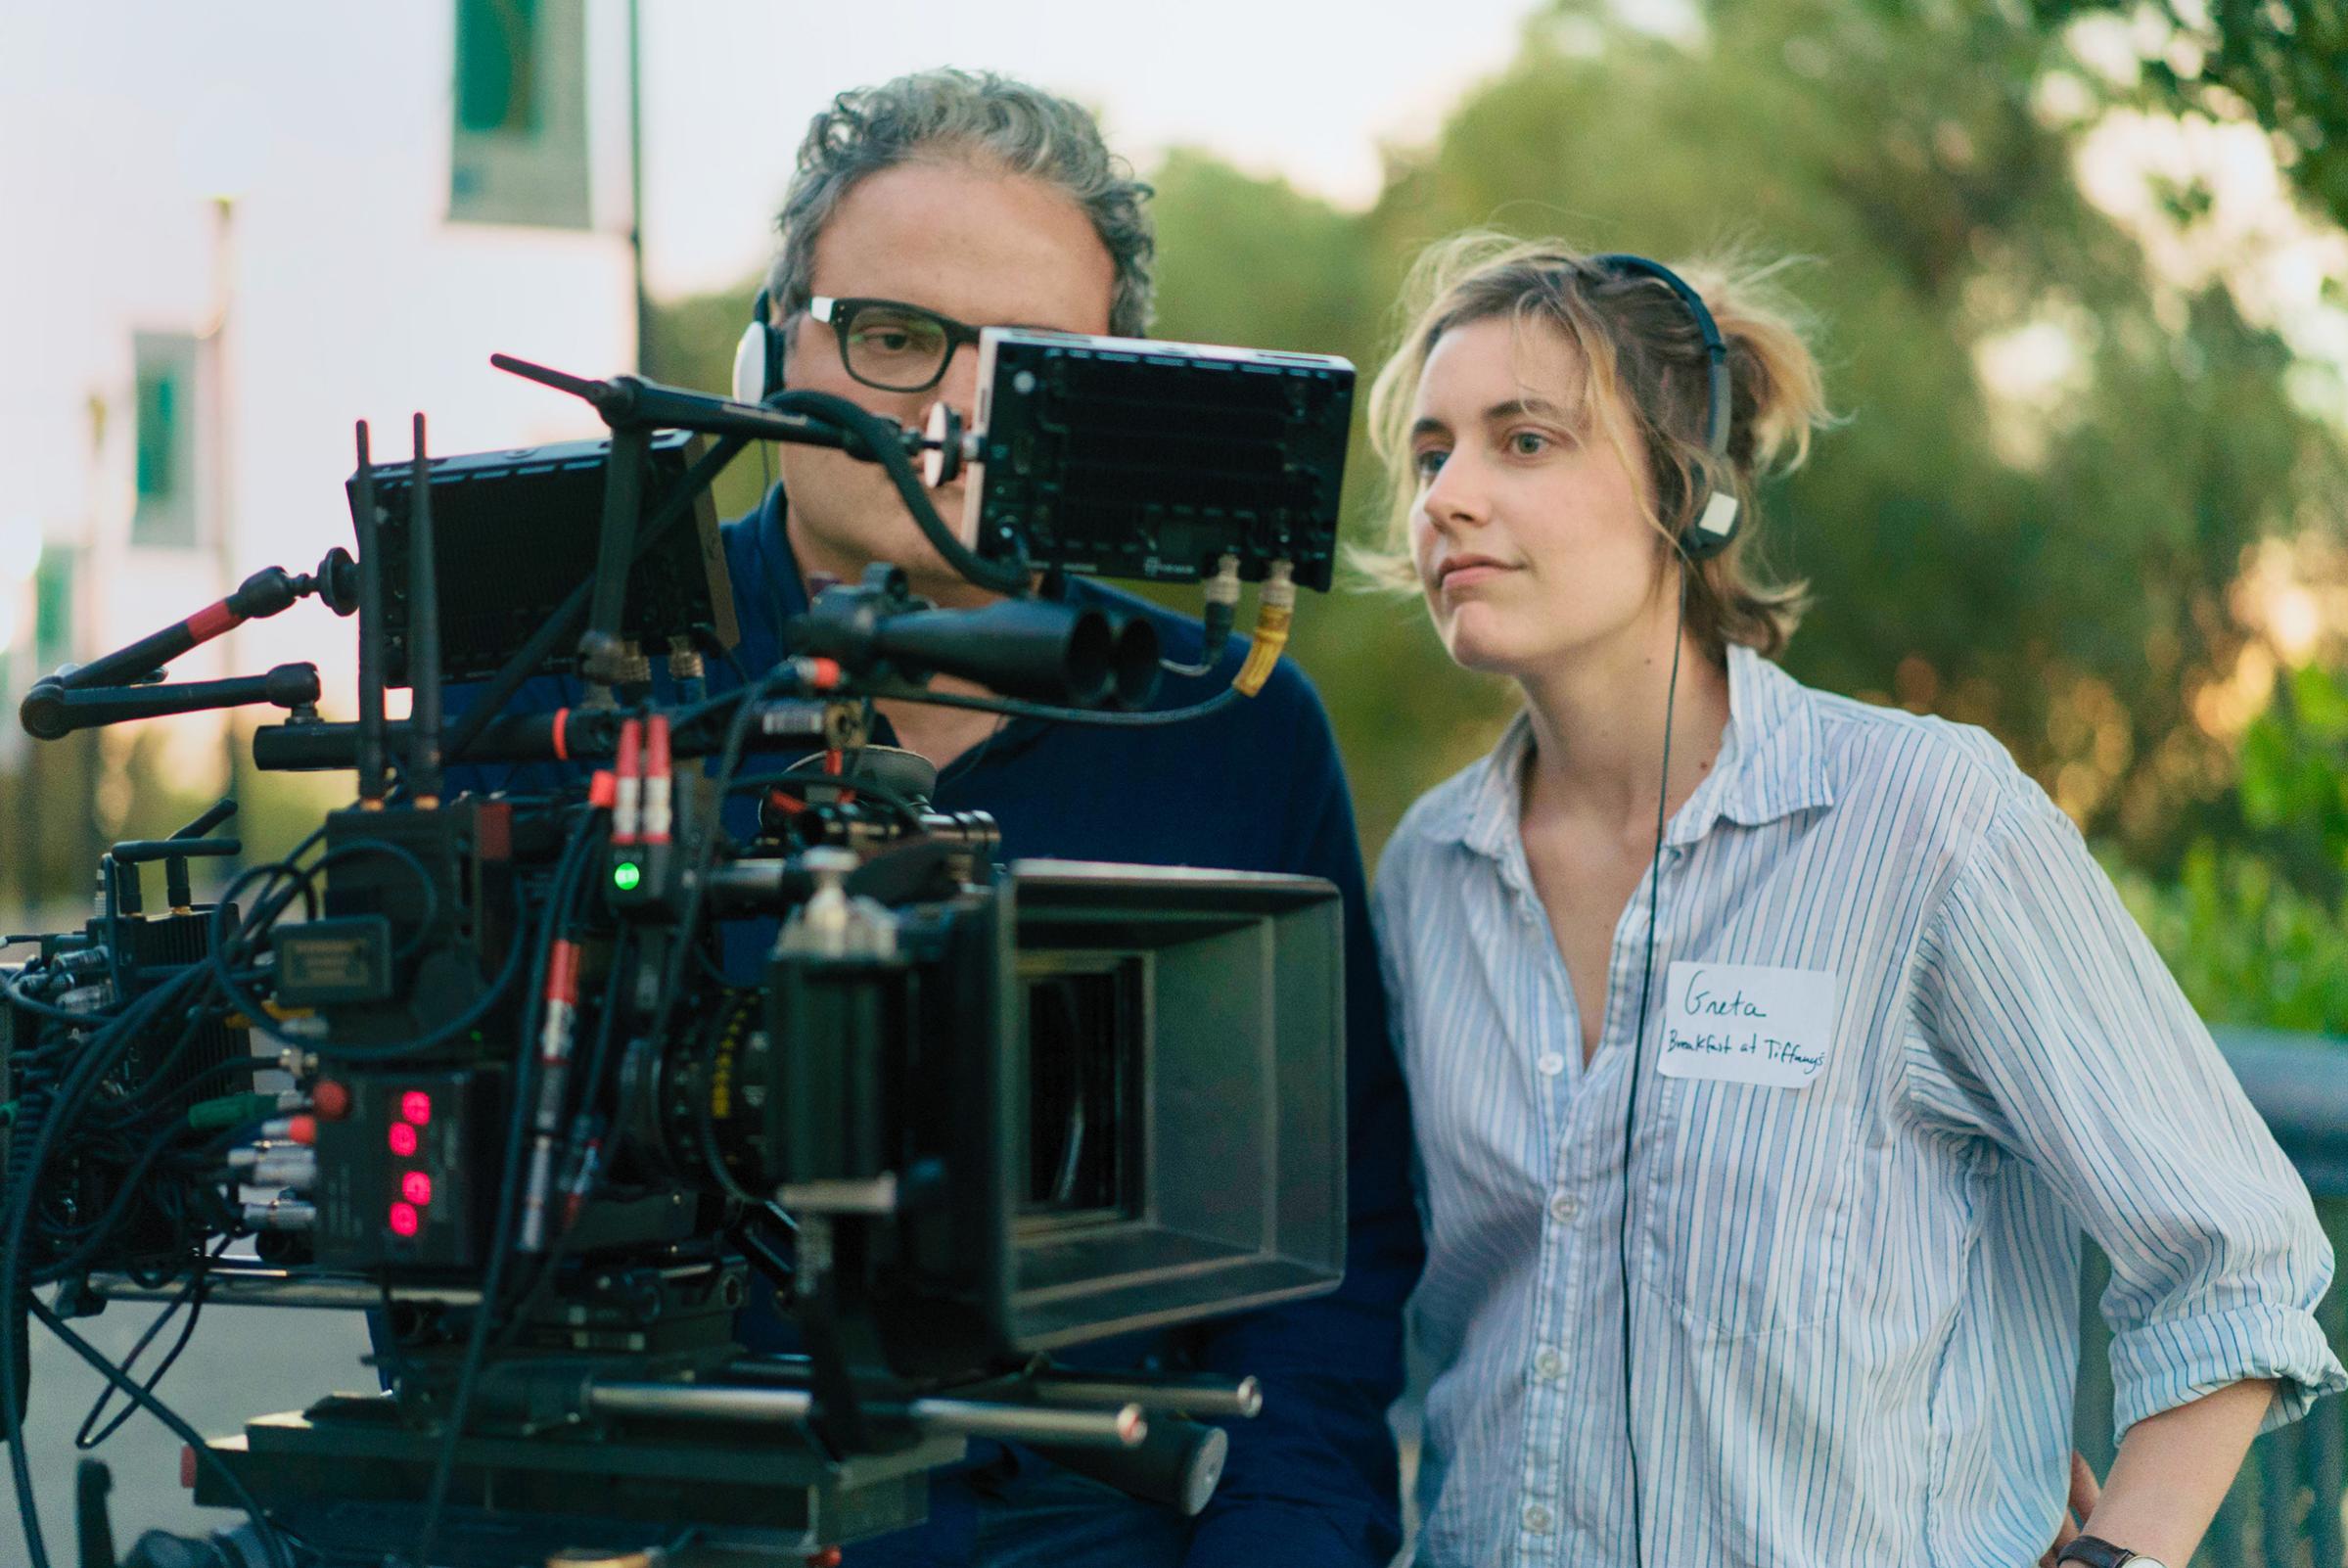 Greta Gerwig had the cast and crew of Lady Bird wear name tags to create a warm atmosphere on set